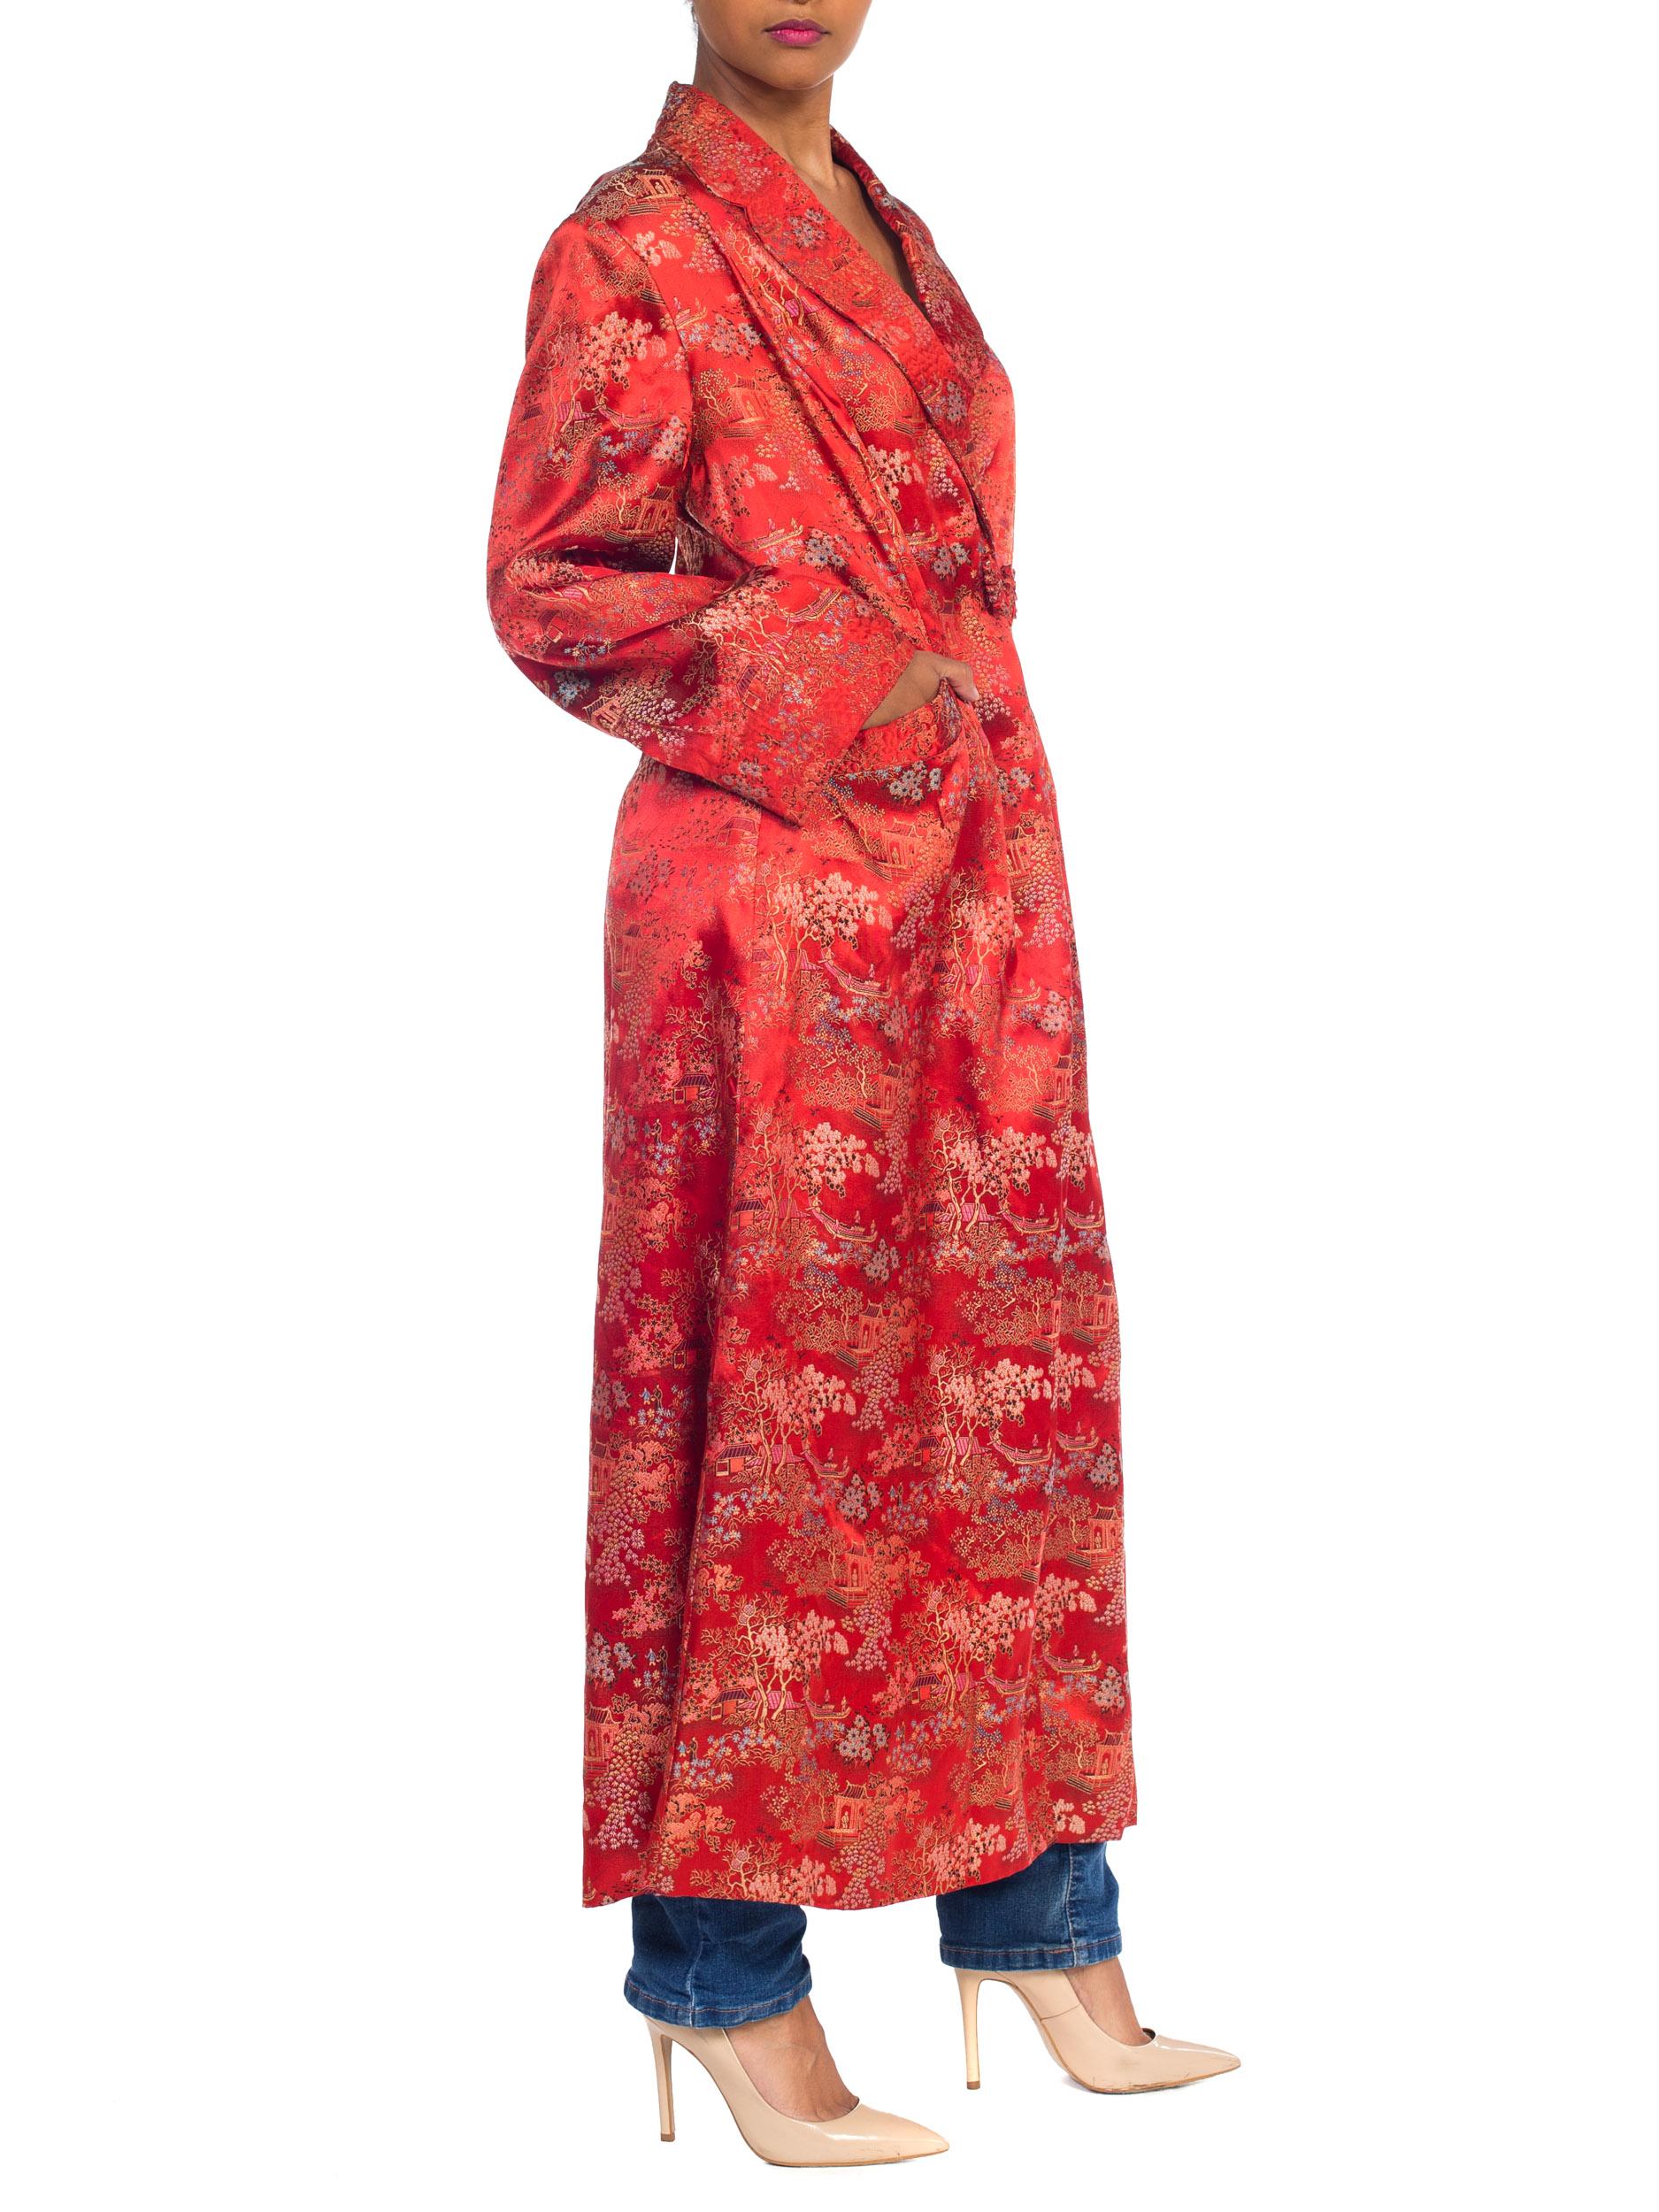 Red Vintage Chinese Men's Robe Style Duster Coat